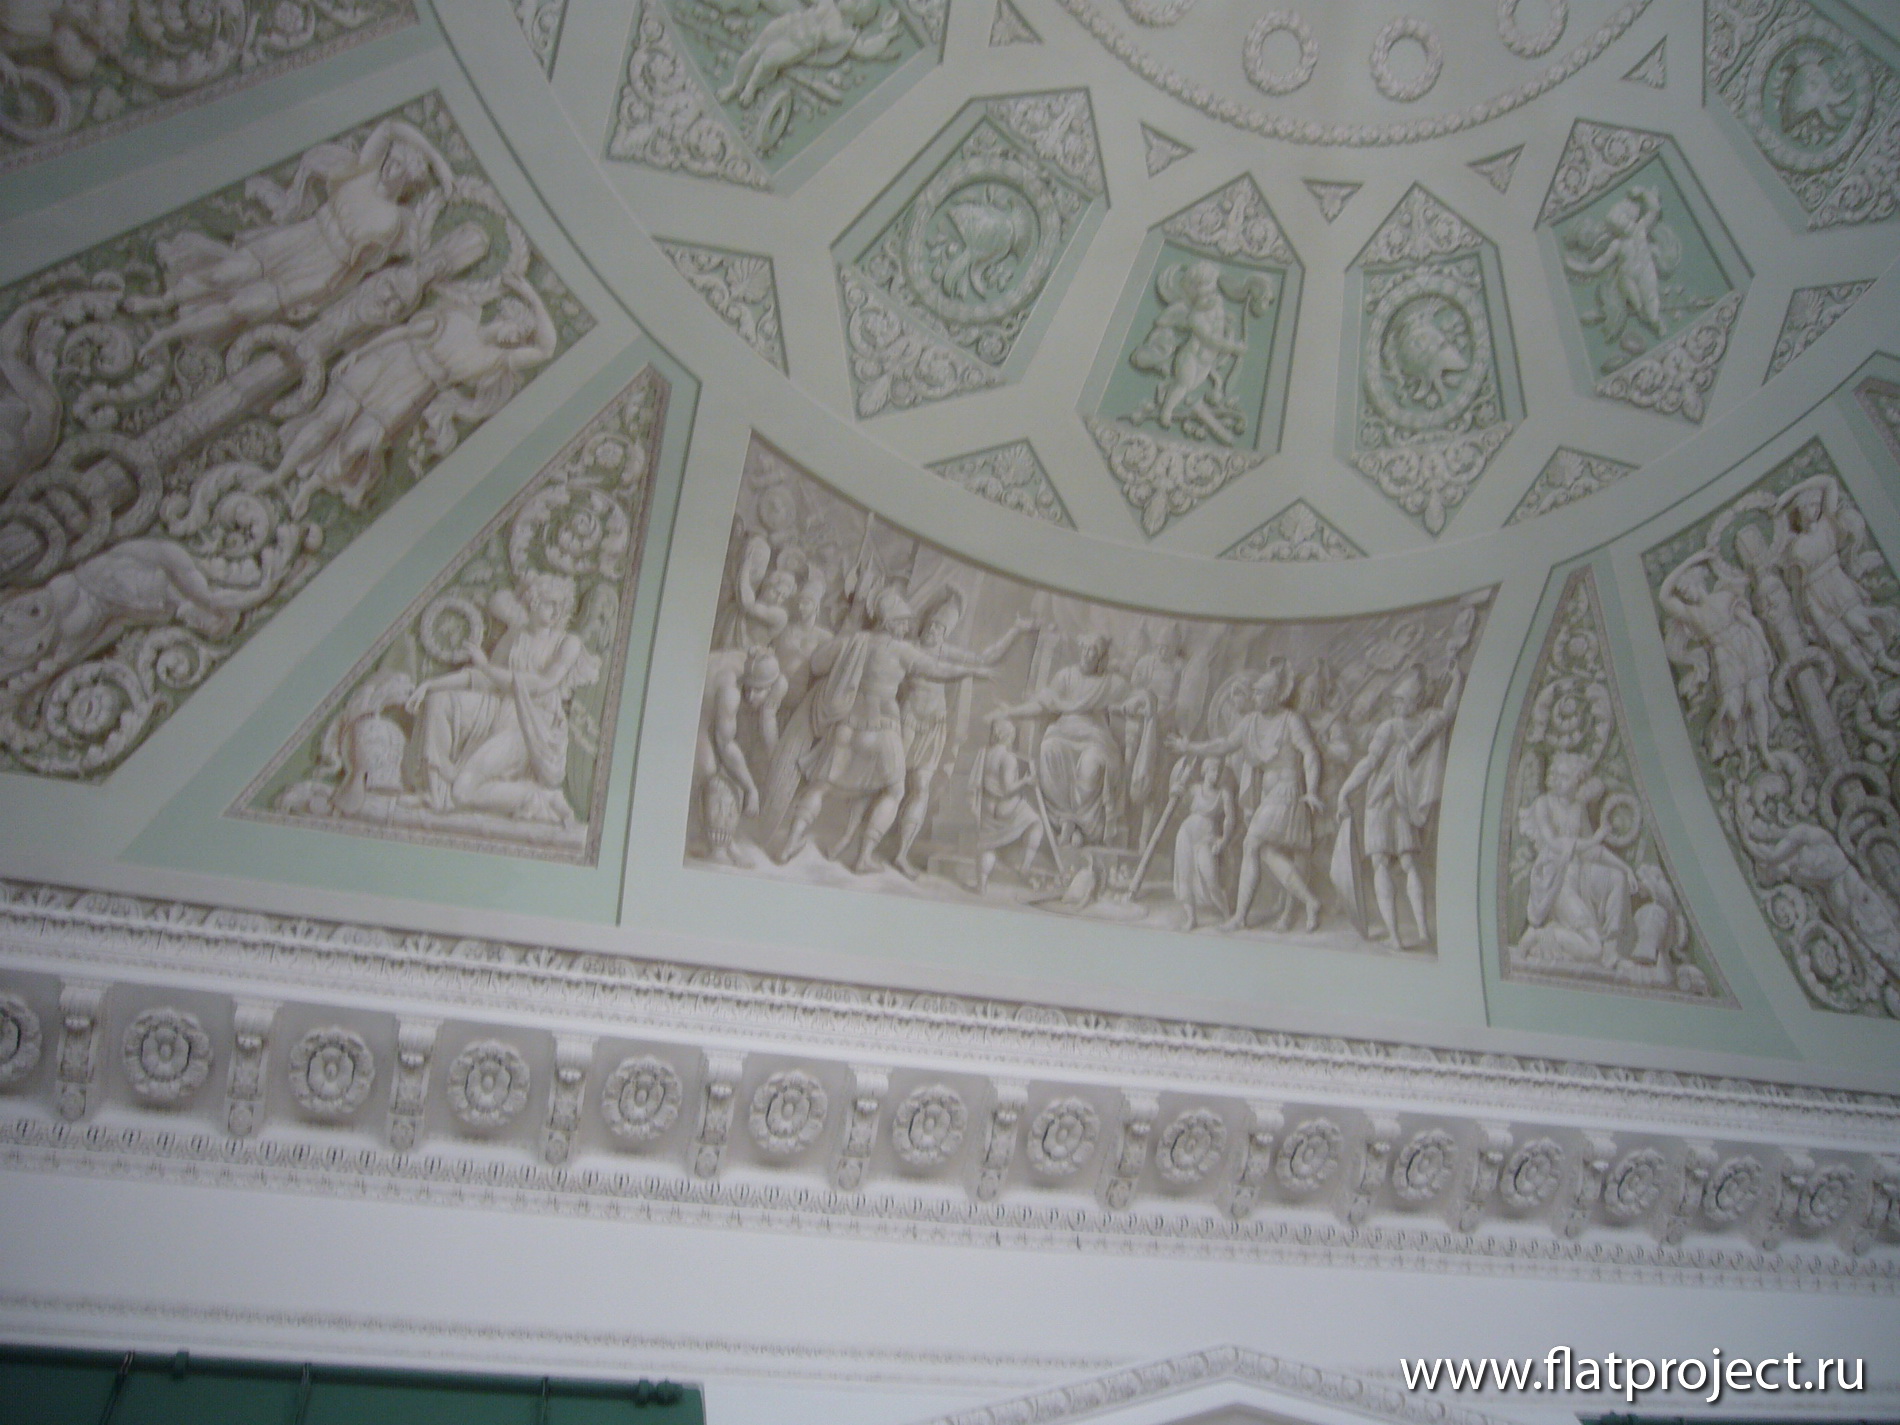 The State Russian museum interiors – photo 26